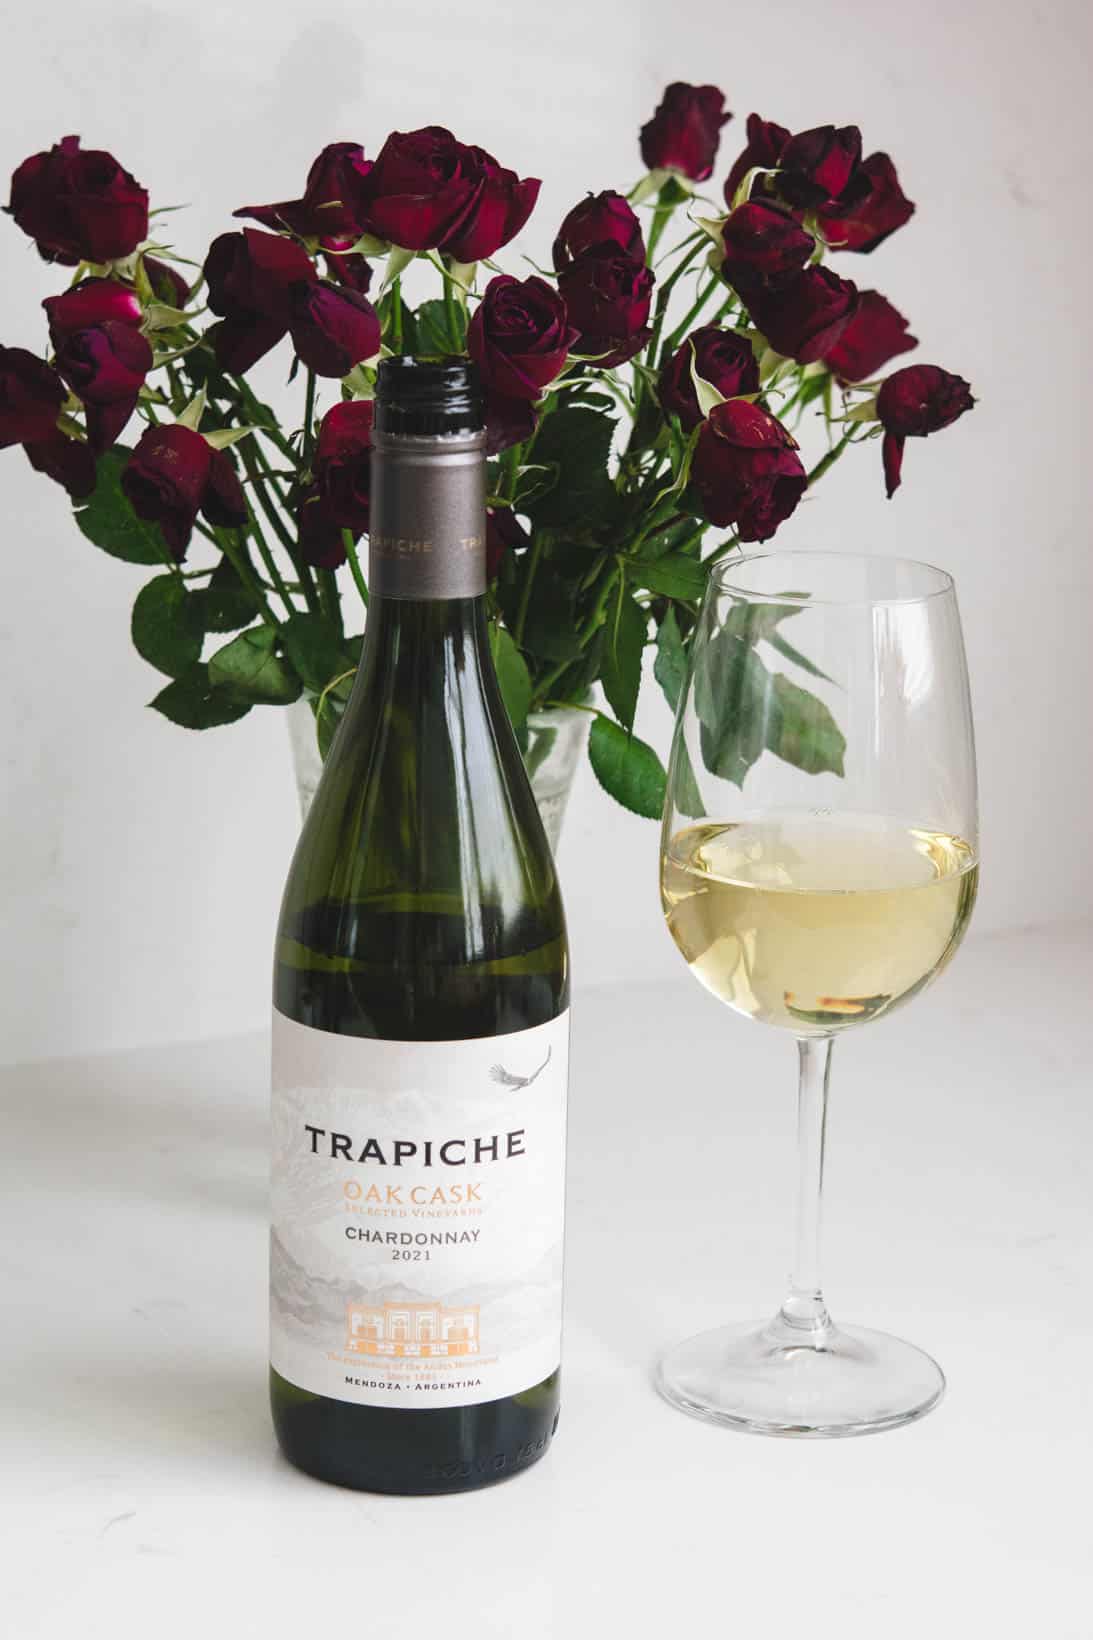 Wine bottle and glass of Trapiche Chardonnay with red roses in the background